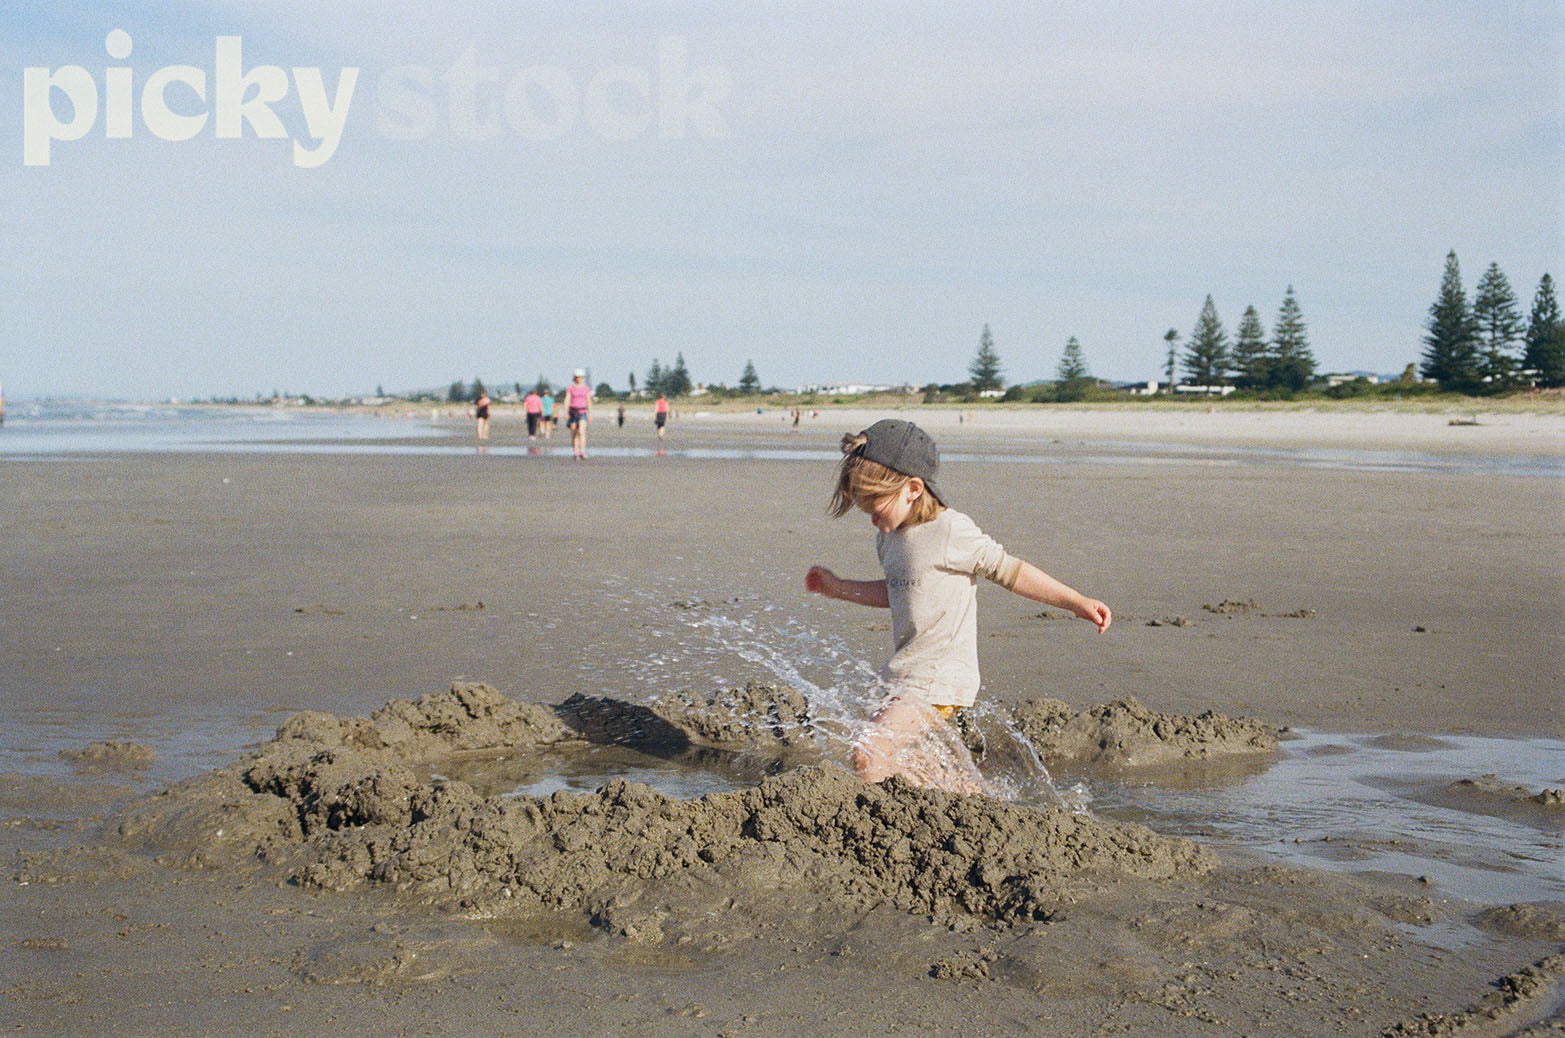 Image of young boy running through sandcastle with water splashing. Kid is wearing a cap, with mid length hair. Bunch of people running behind him. Ocean in background. 